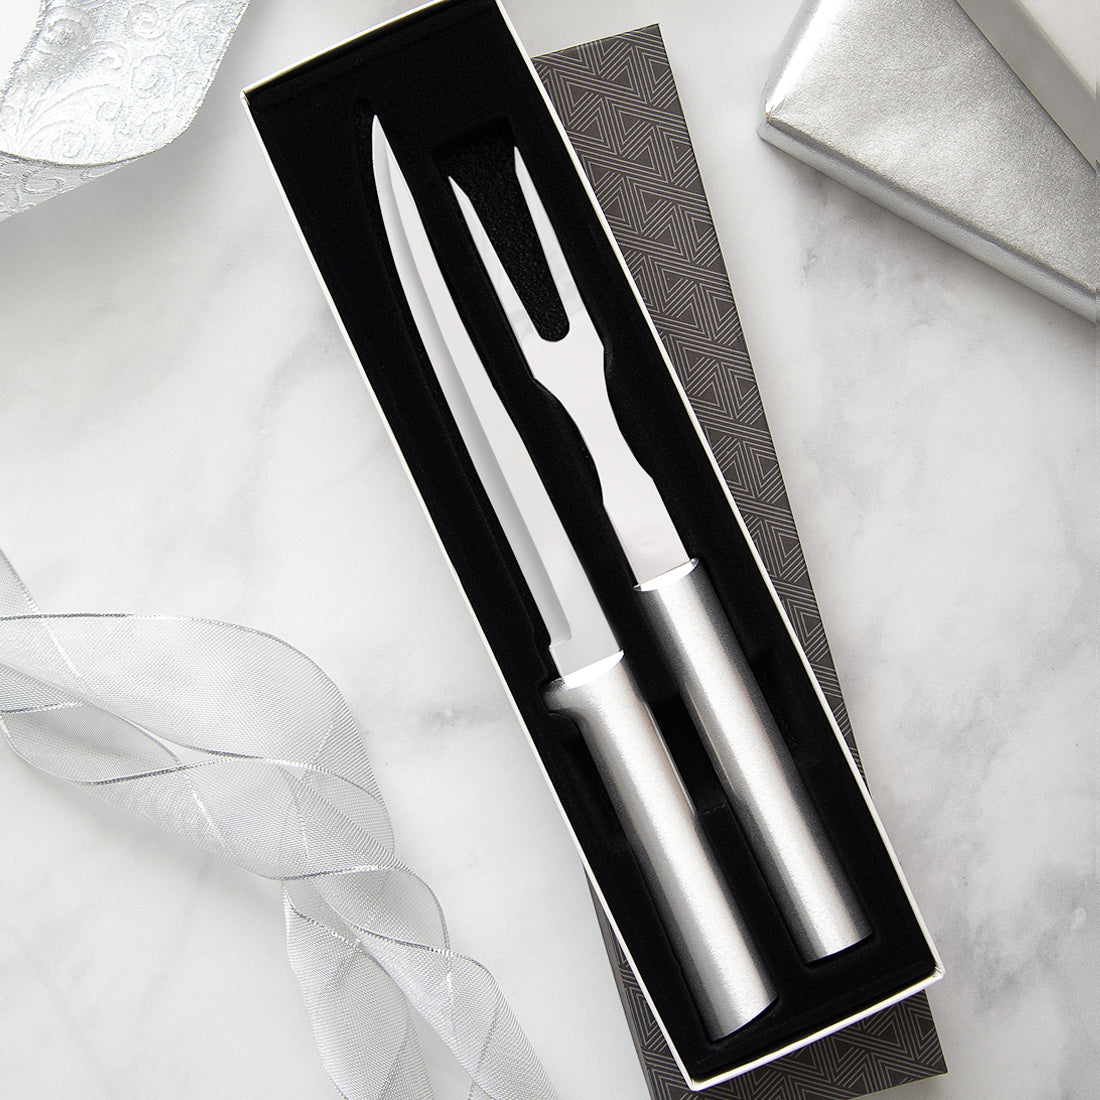 Rada Cutlery Carving Gift Set with silver handles in a black-lined gift box. 